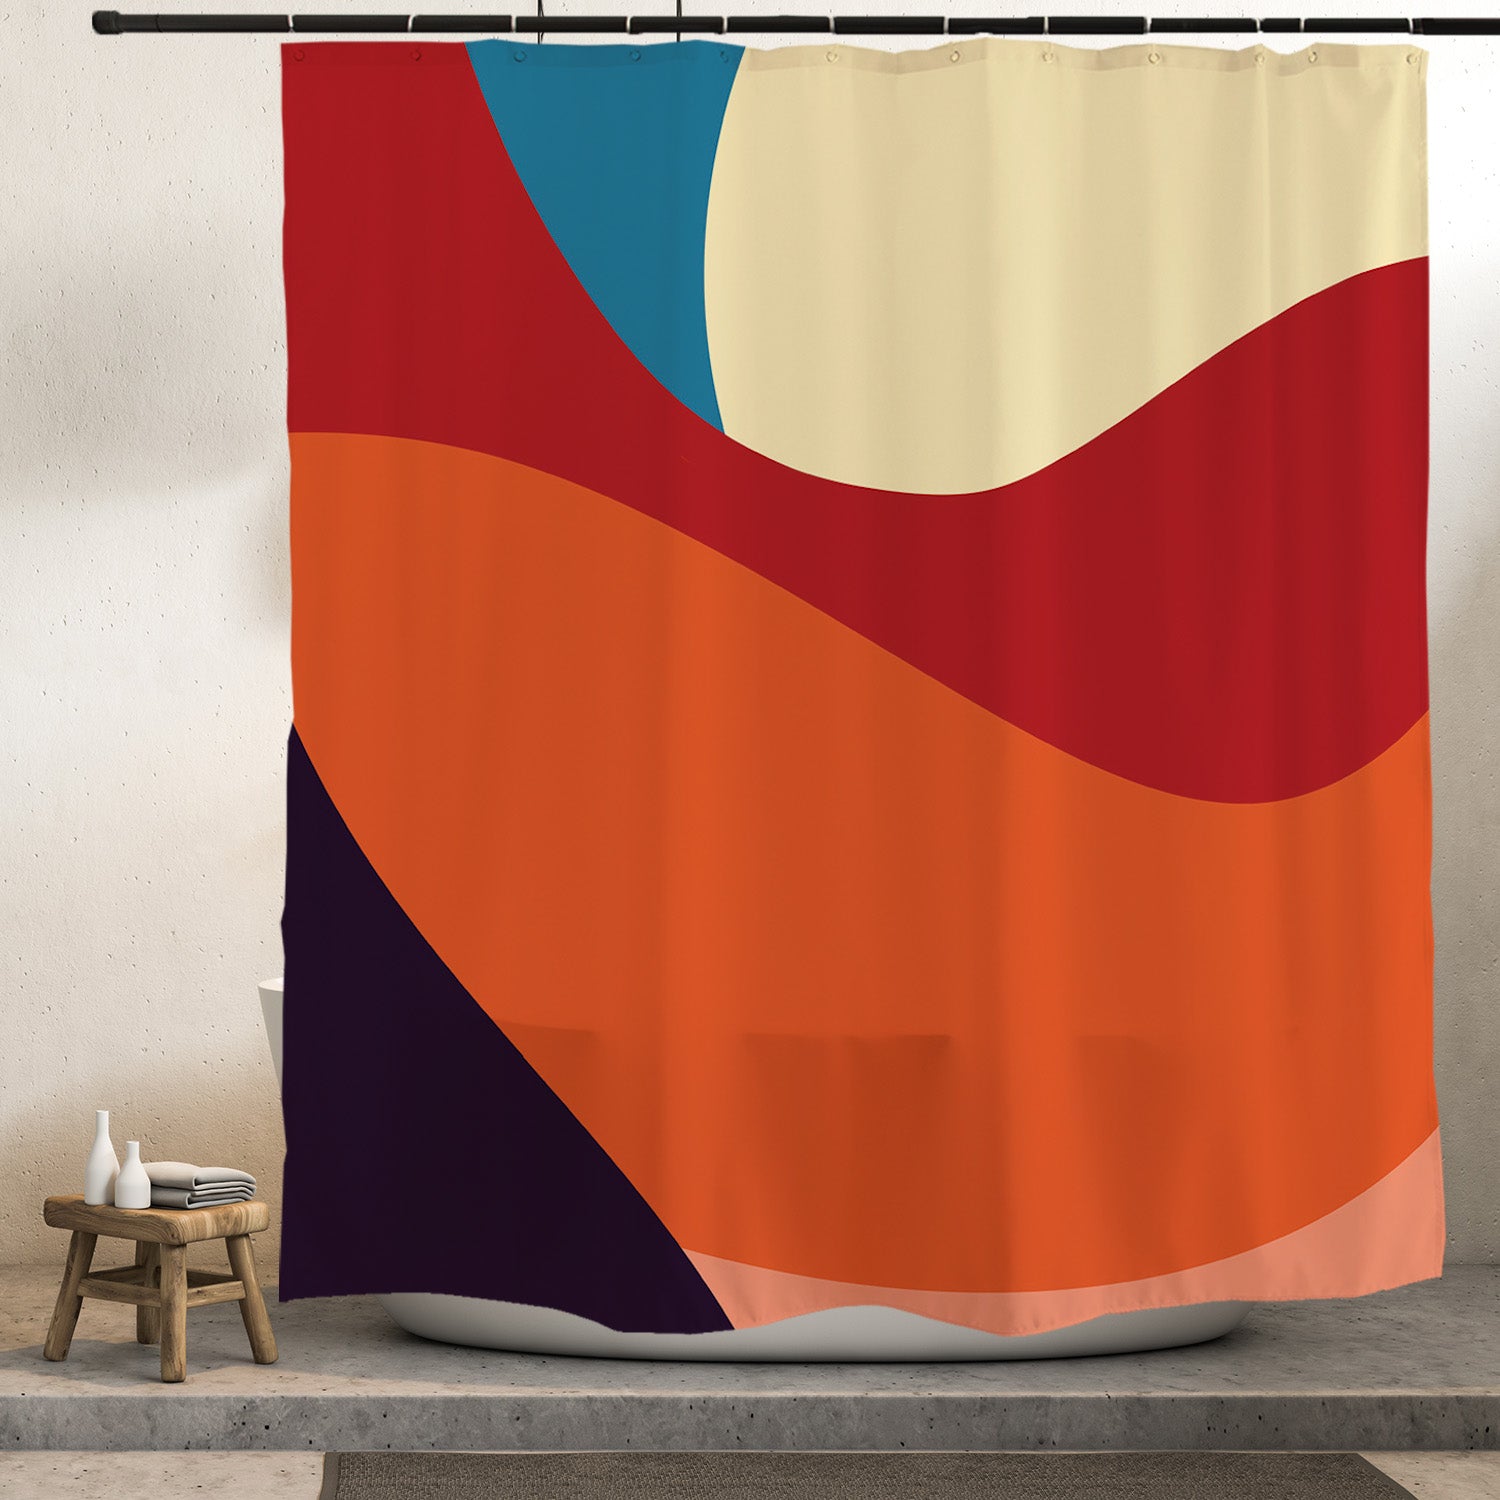 Feblilac Black and Red Abstract Curves Shower Curtain with Hooks